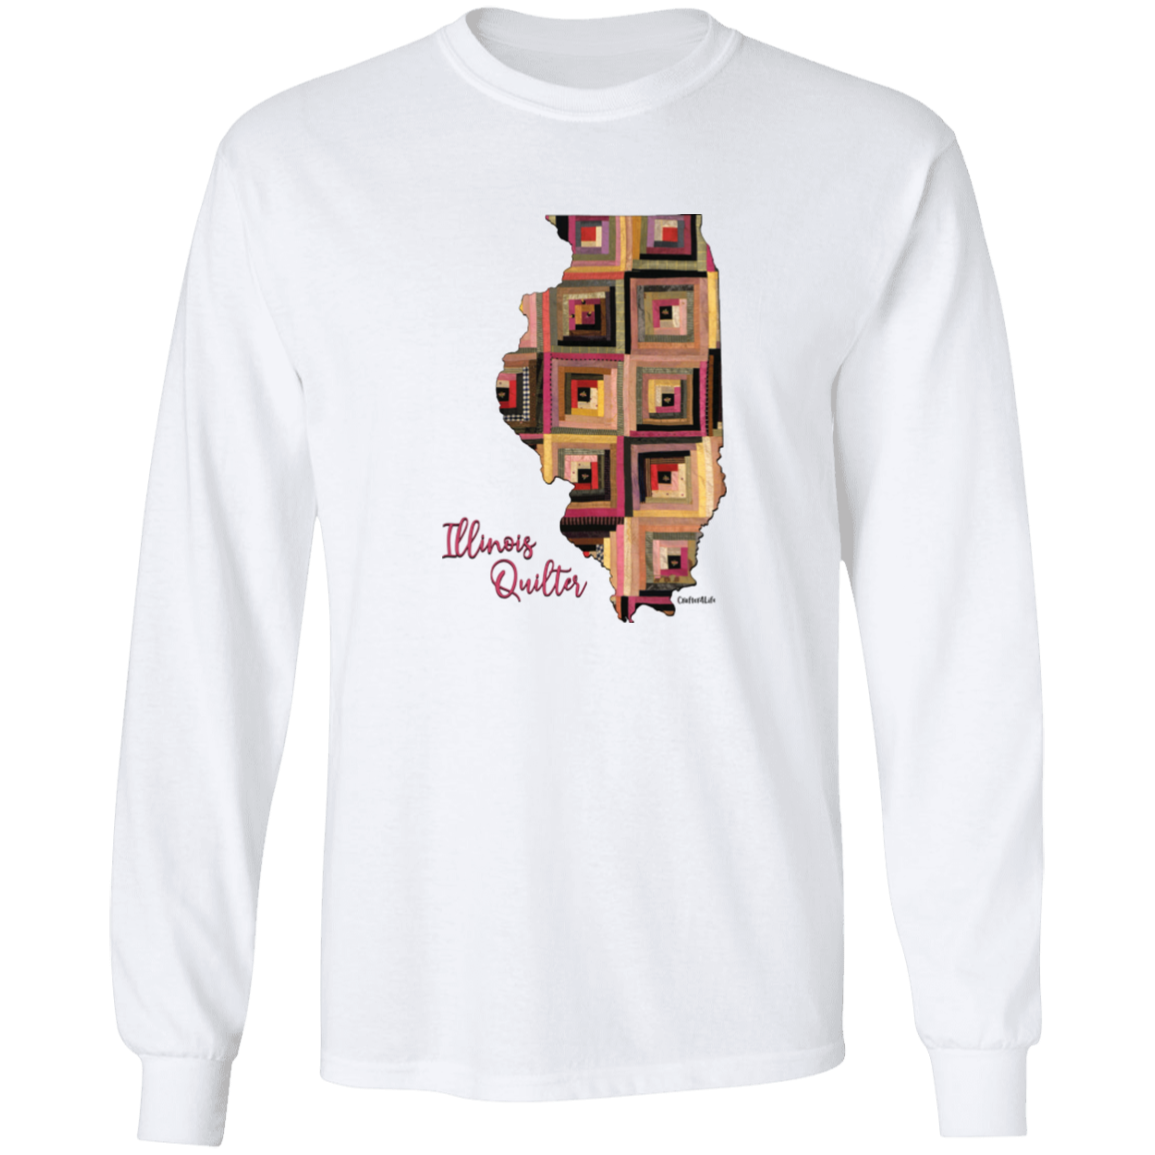 Illinois Quilter Long Sleeve T-Shirt, Gift for Quilting Friends and Family